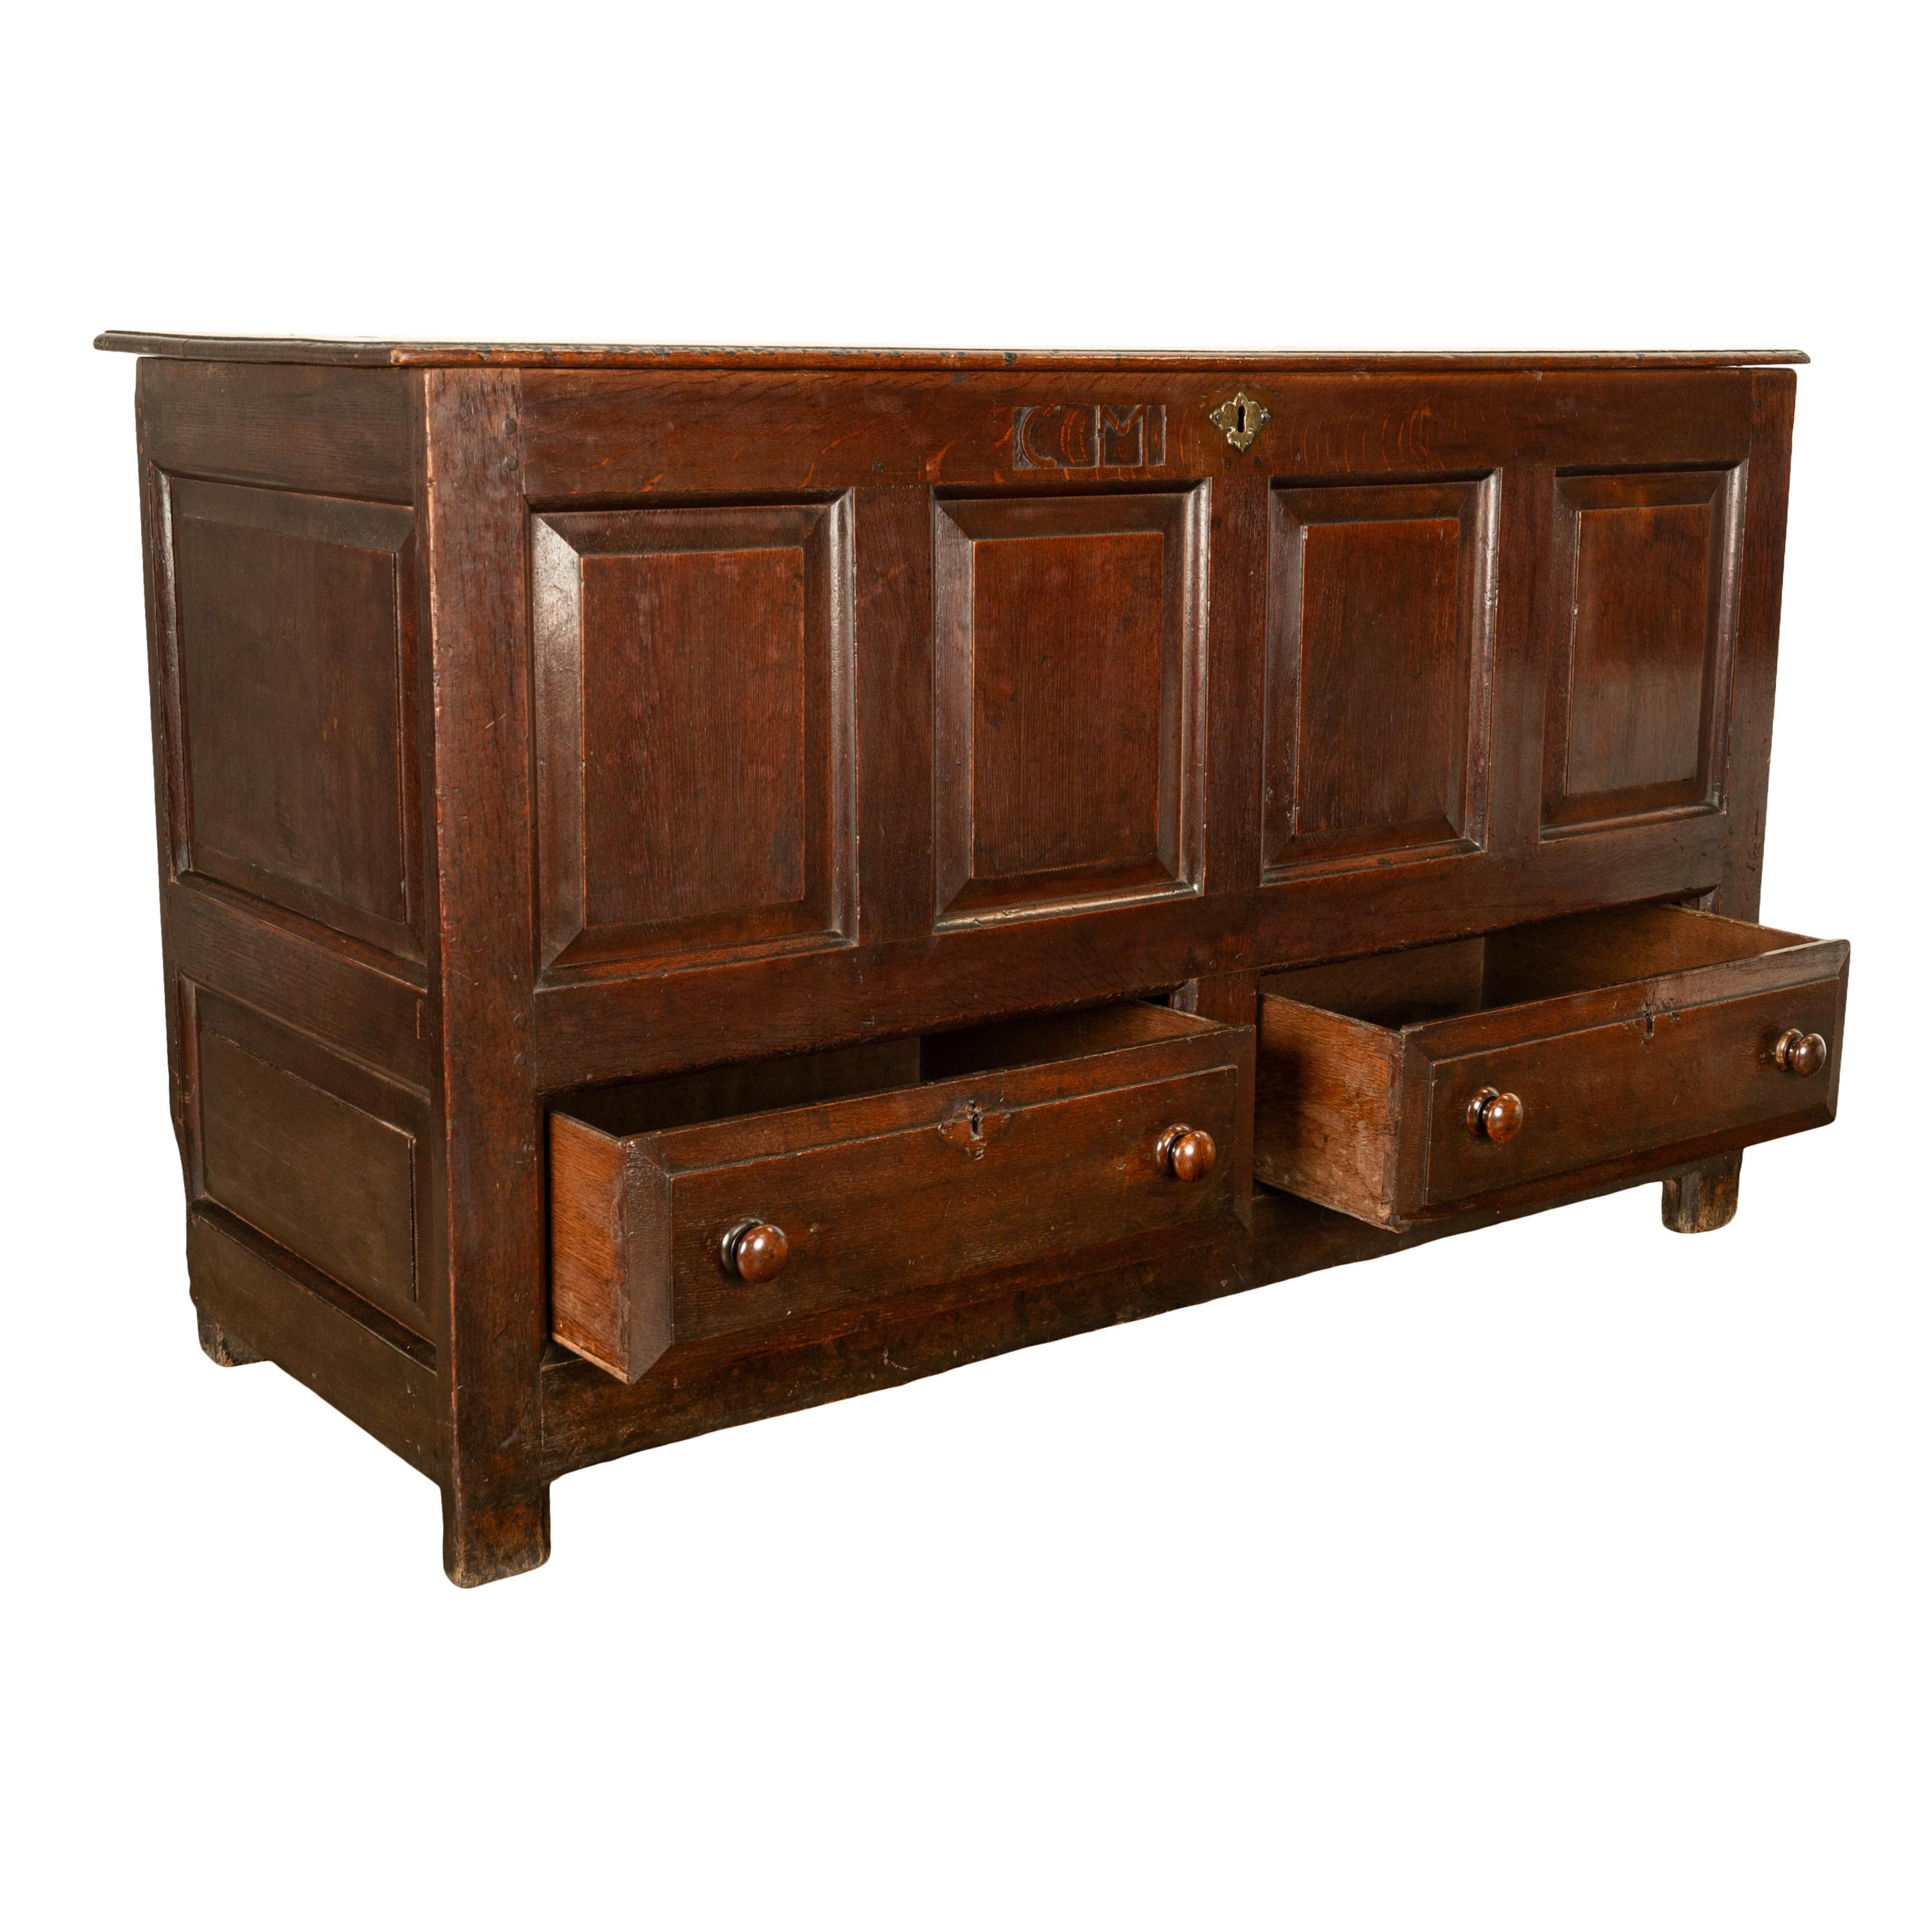 Monumental Antique Georgian Joined Oak Mule Dowry Chest Coffer Yorkshire 1720 For Sale 5